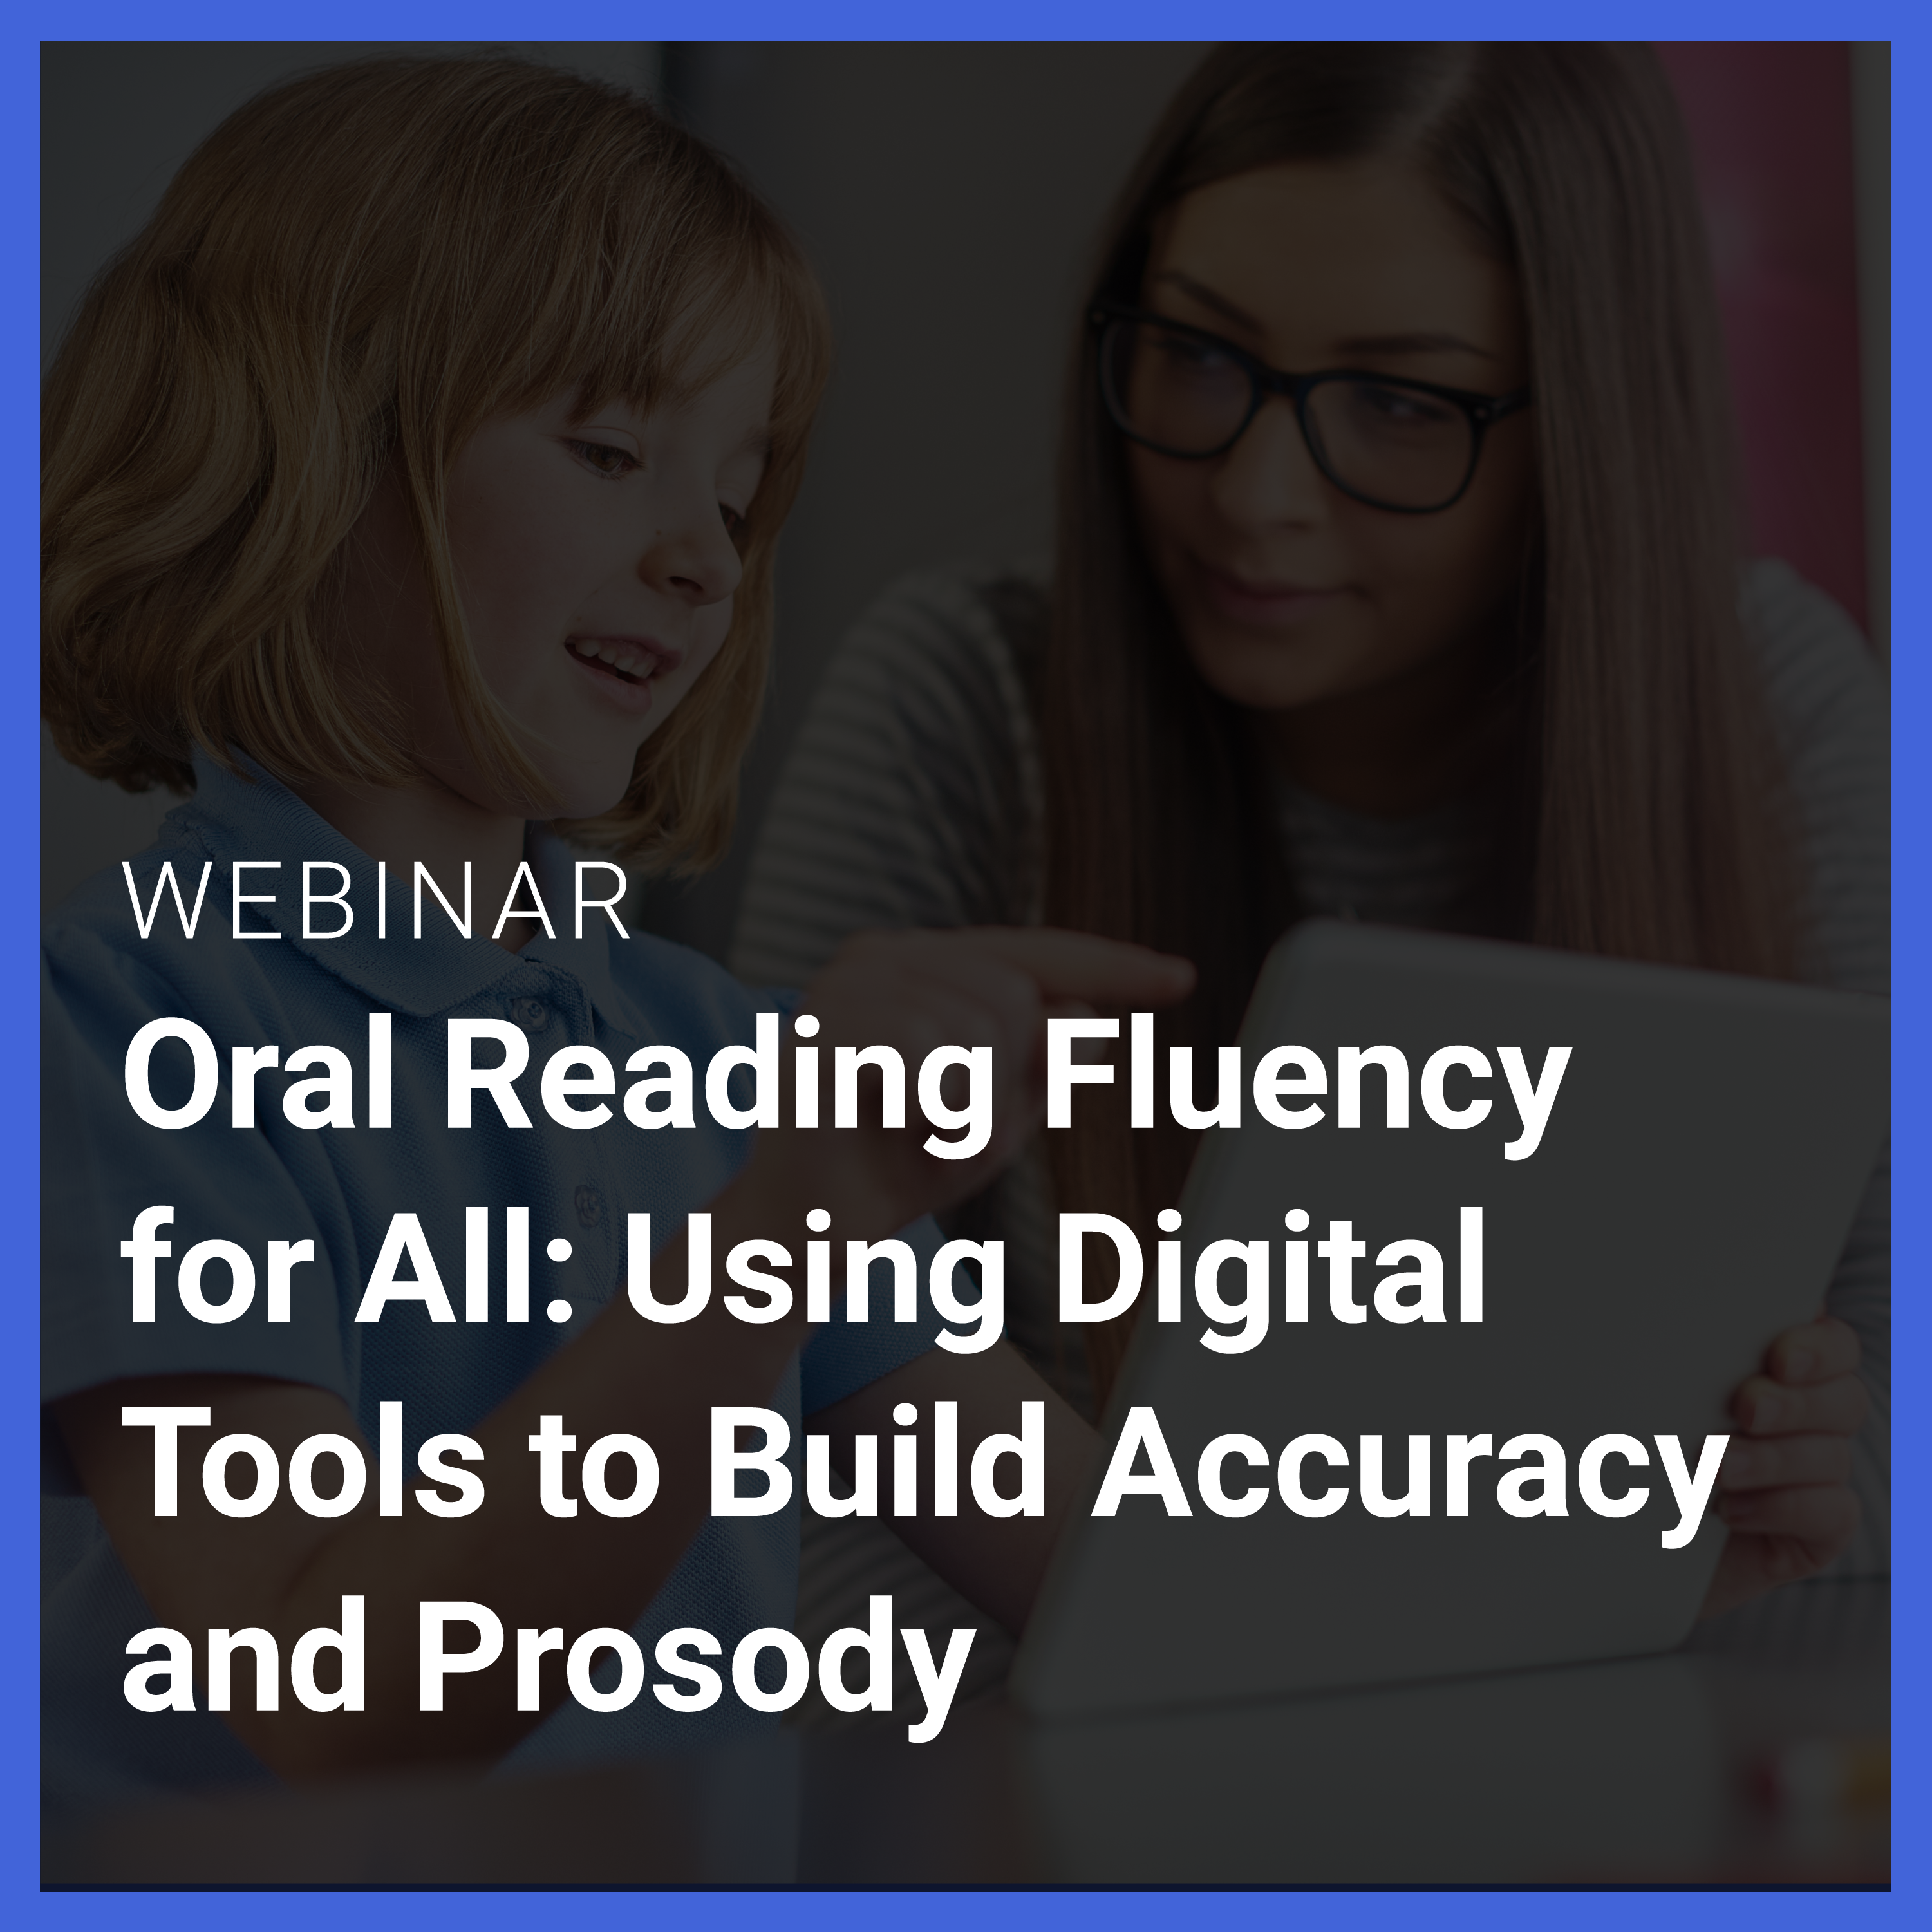 Oral Reading Fluency for All: Using Digital Tools to Build Accuracy and Prosody